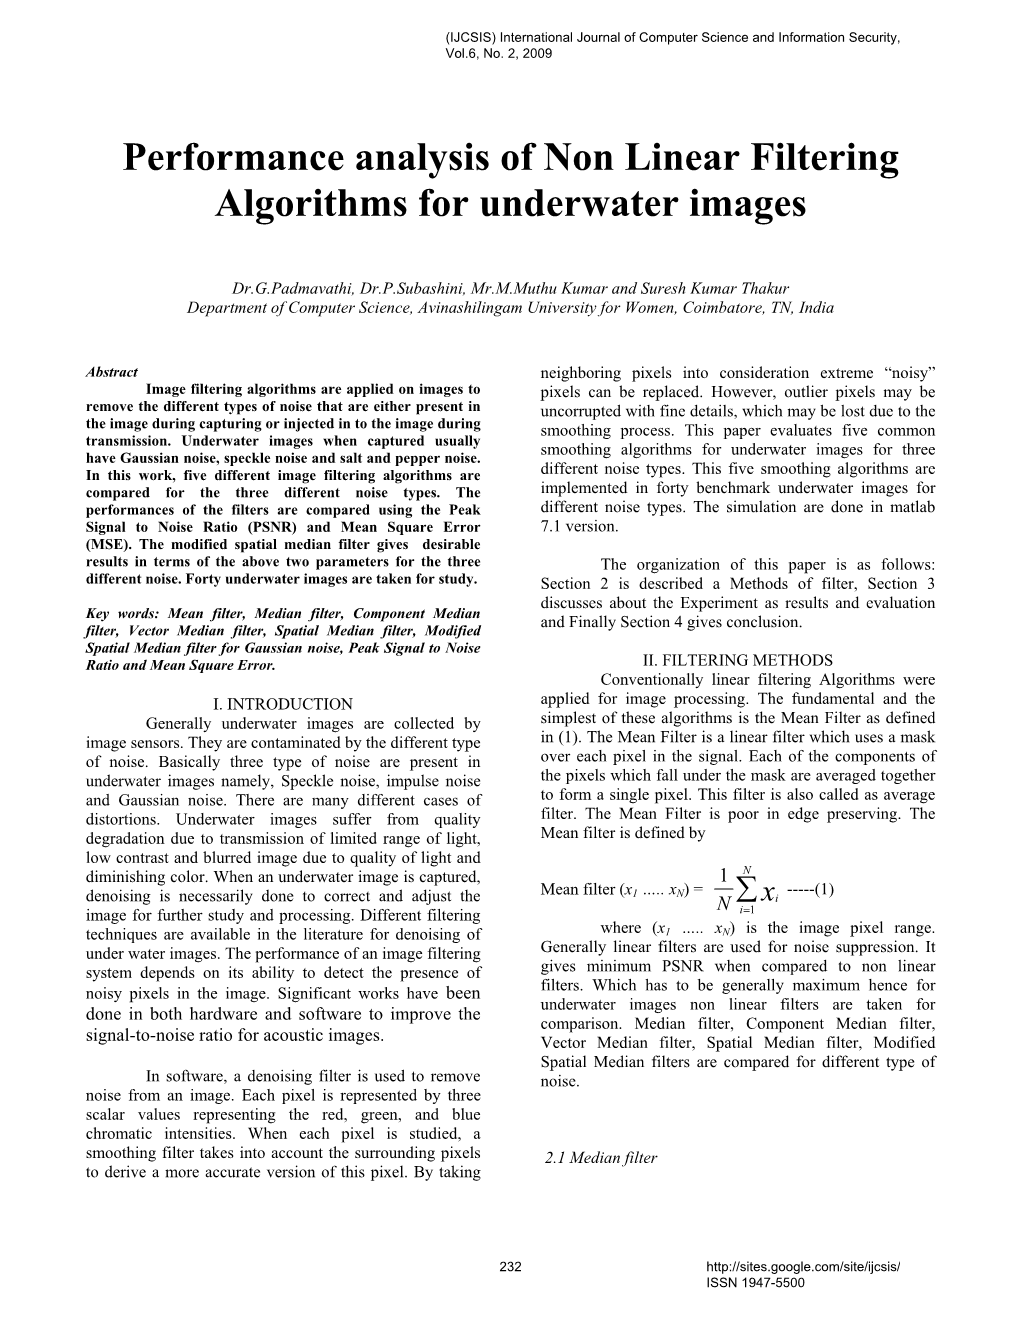 Performance Analysis of Non Linear Filtering Algorithms for Underwater Images